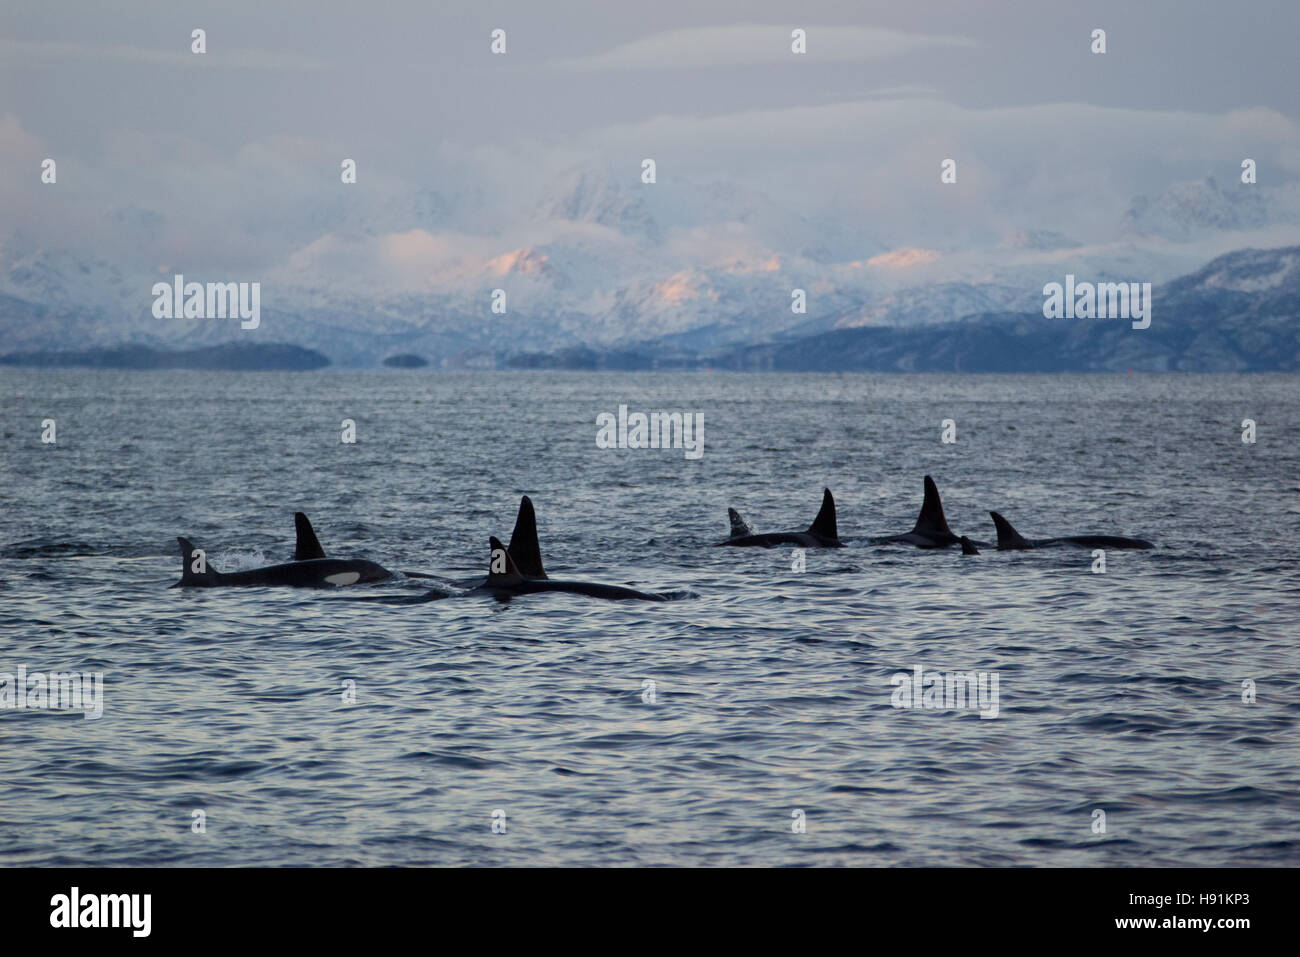 Family group or pod of killer whales (Orca) in Tysfjord, Norway, surrounded by a scenery of mountains with snow. Stock Photo